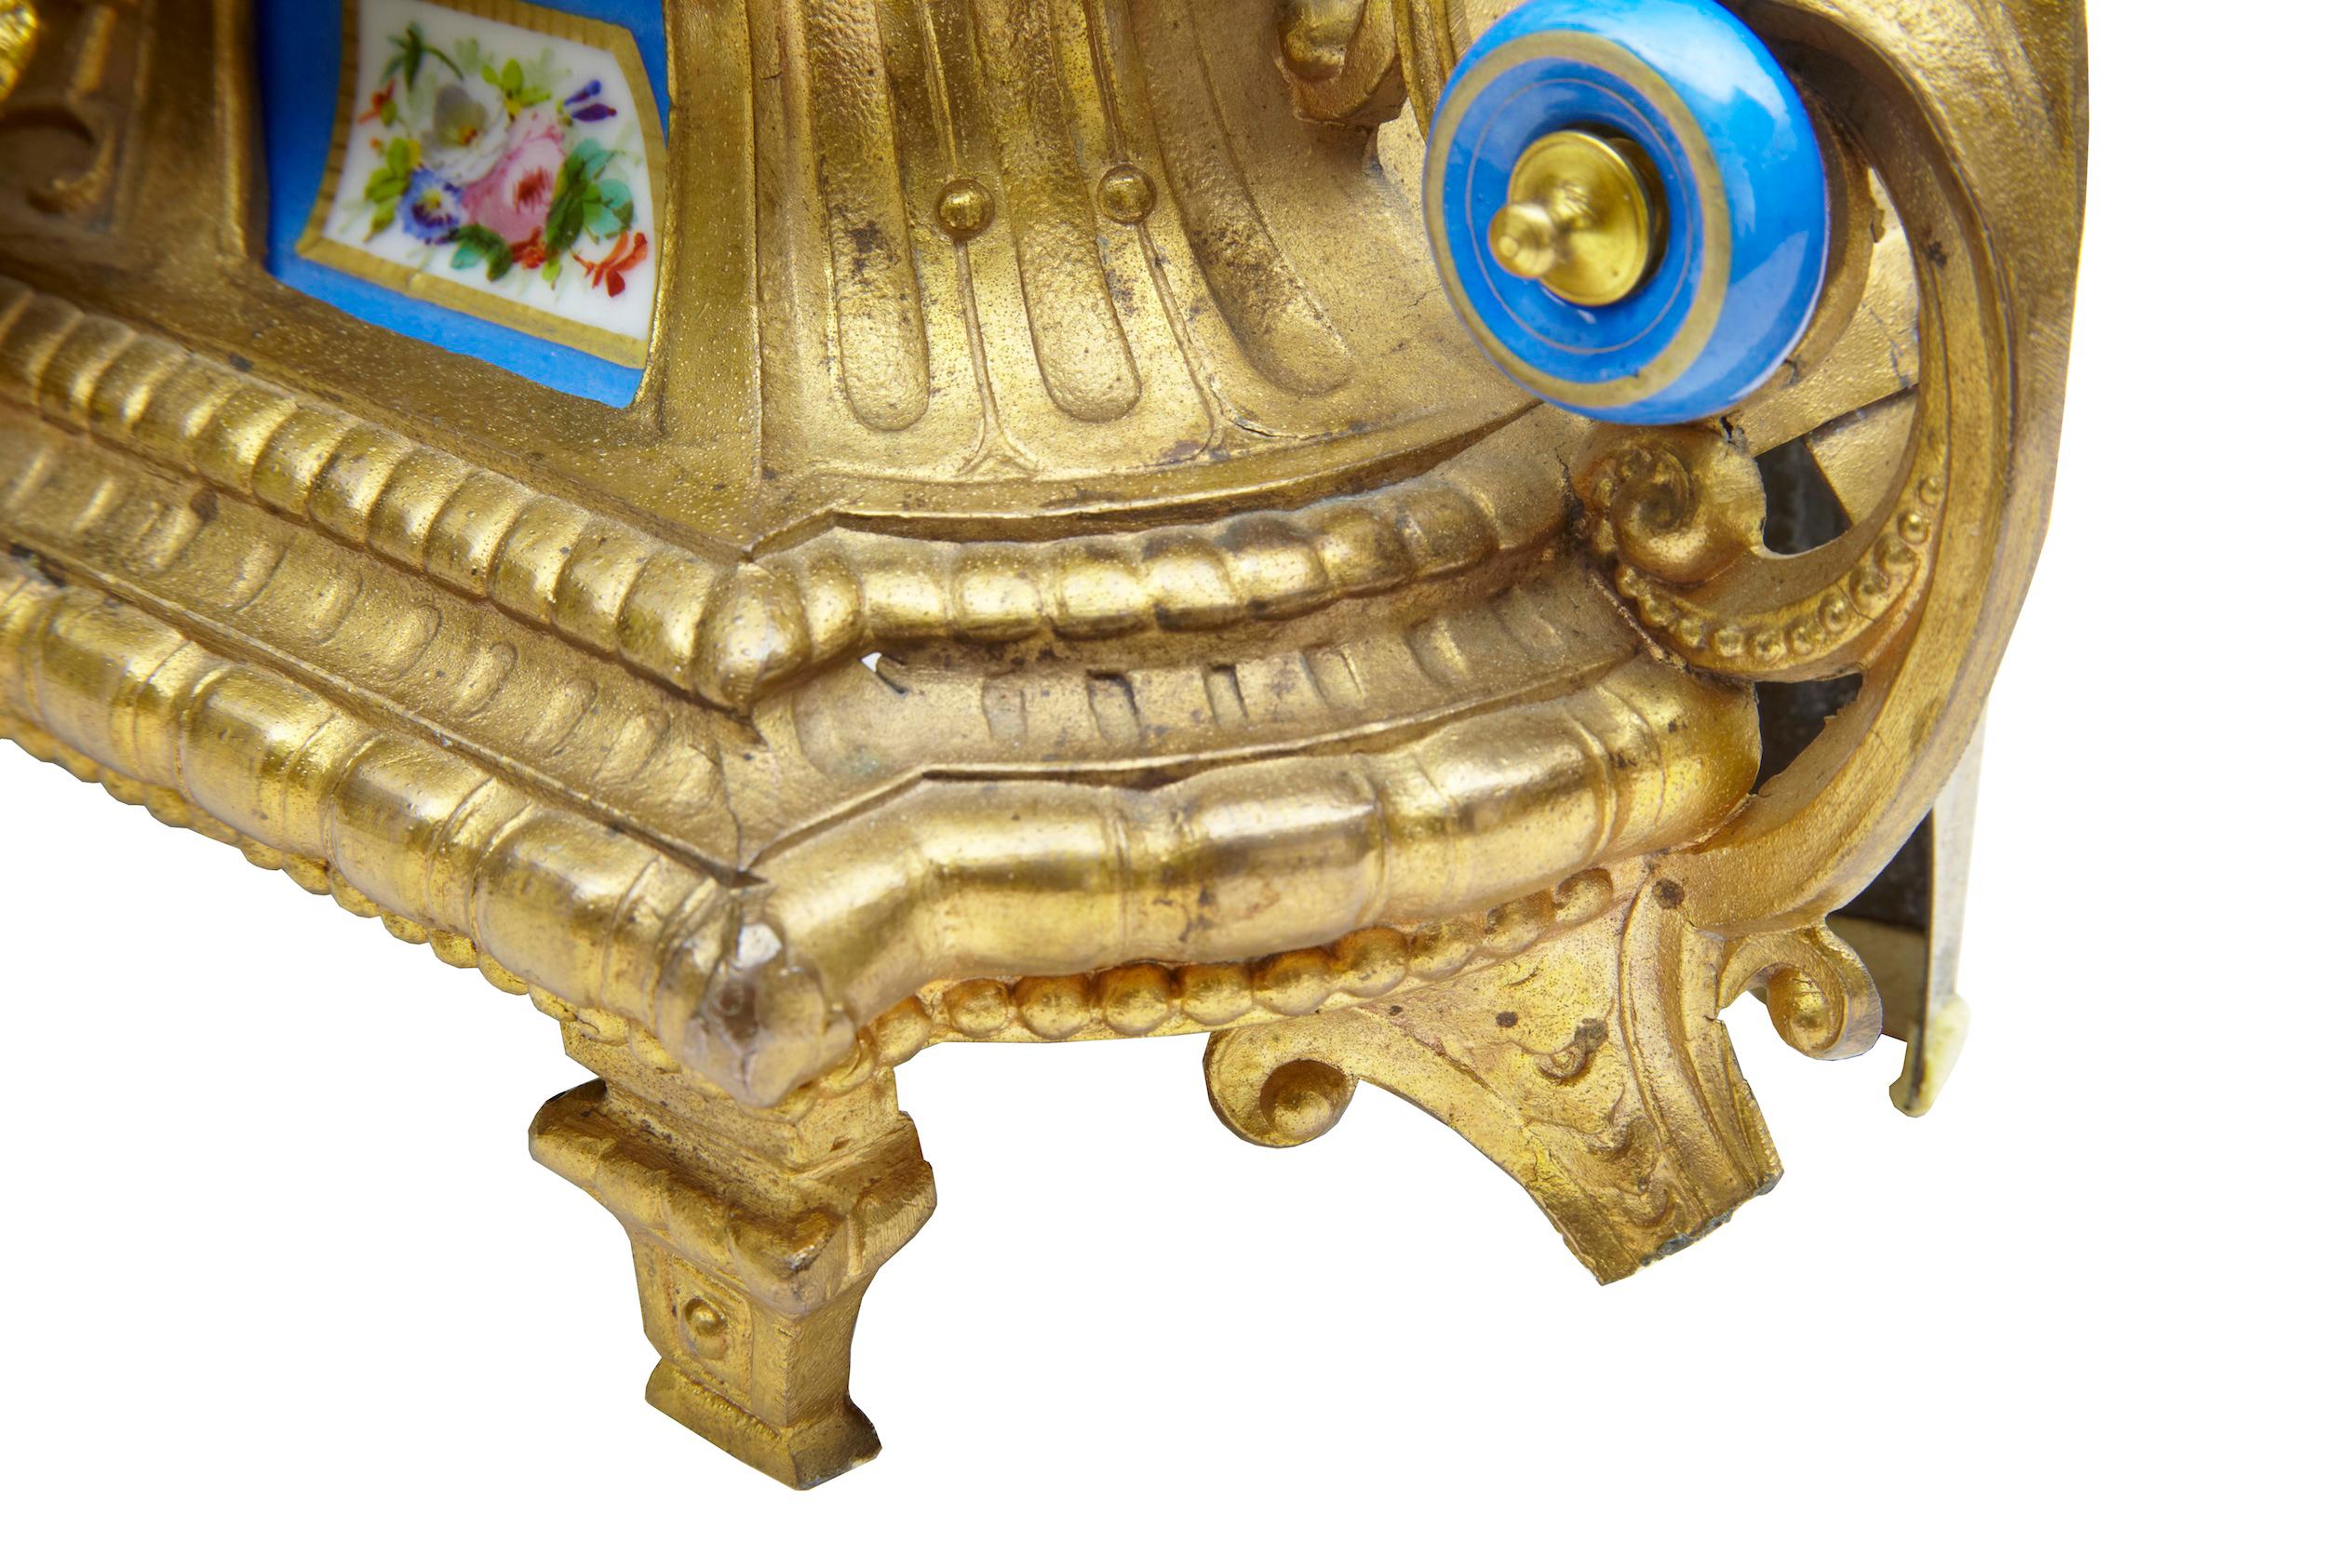 19th Century French Gilt Mantel Clock with Sèvres Plaques 2